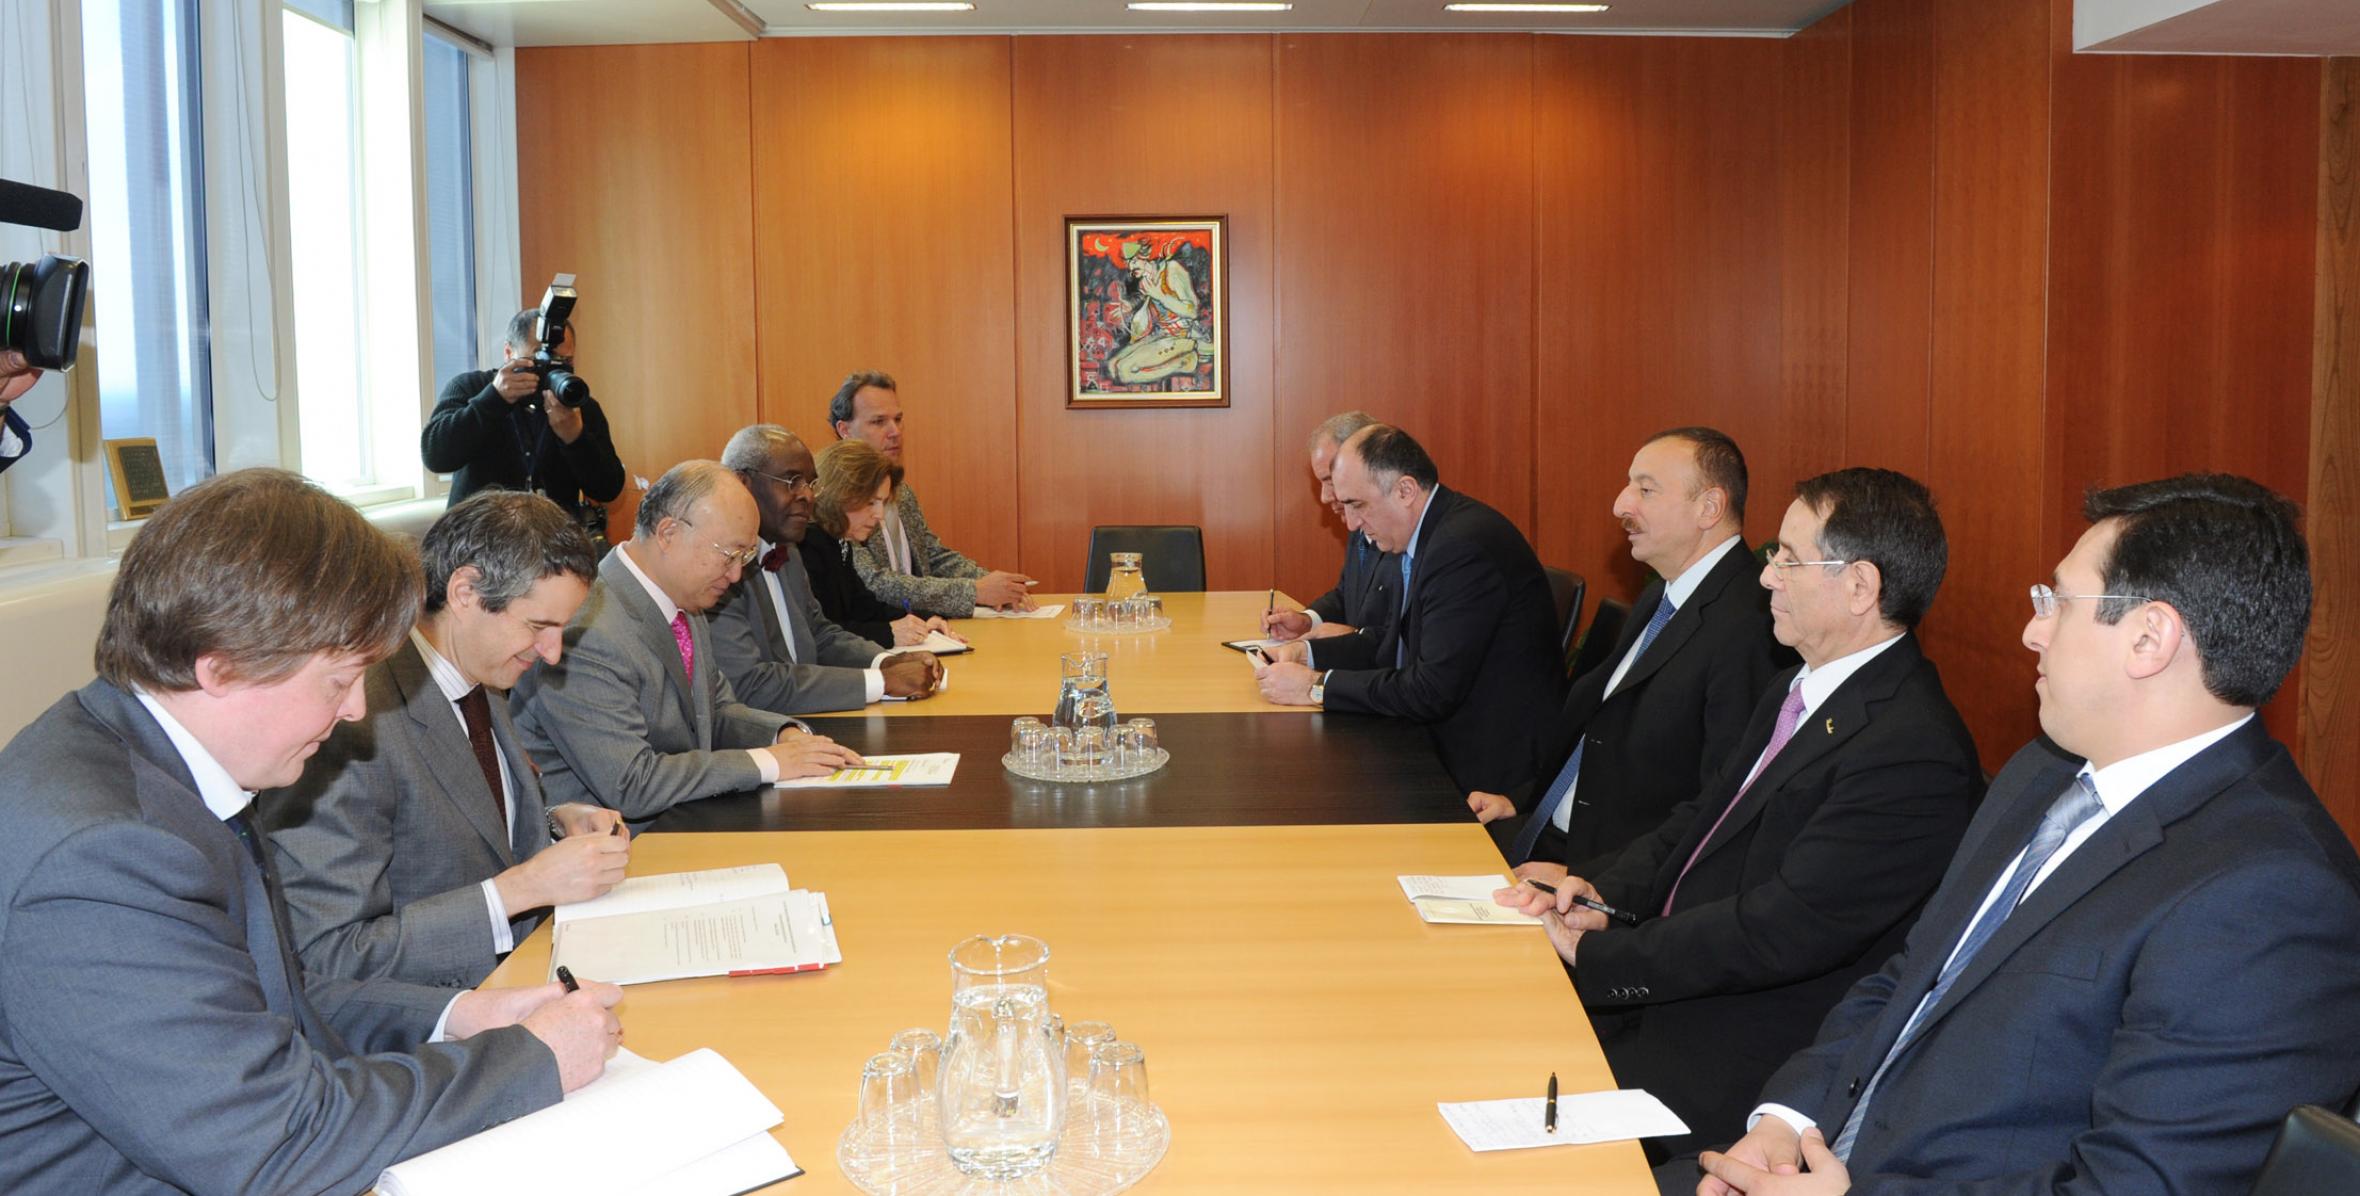 Ilham Aliyev met with the Director General of the International Atomic Energy Agency